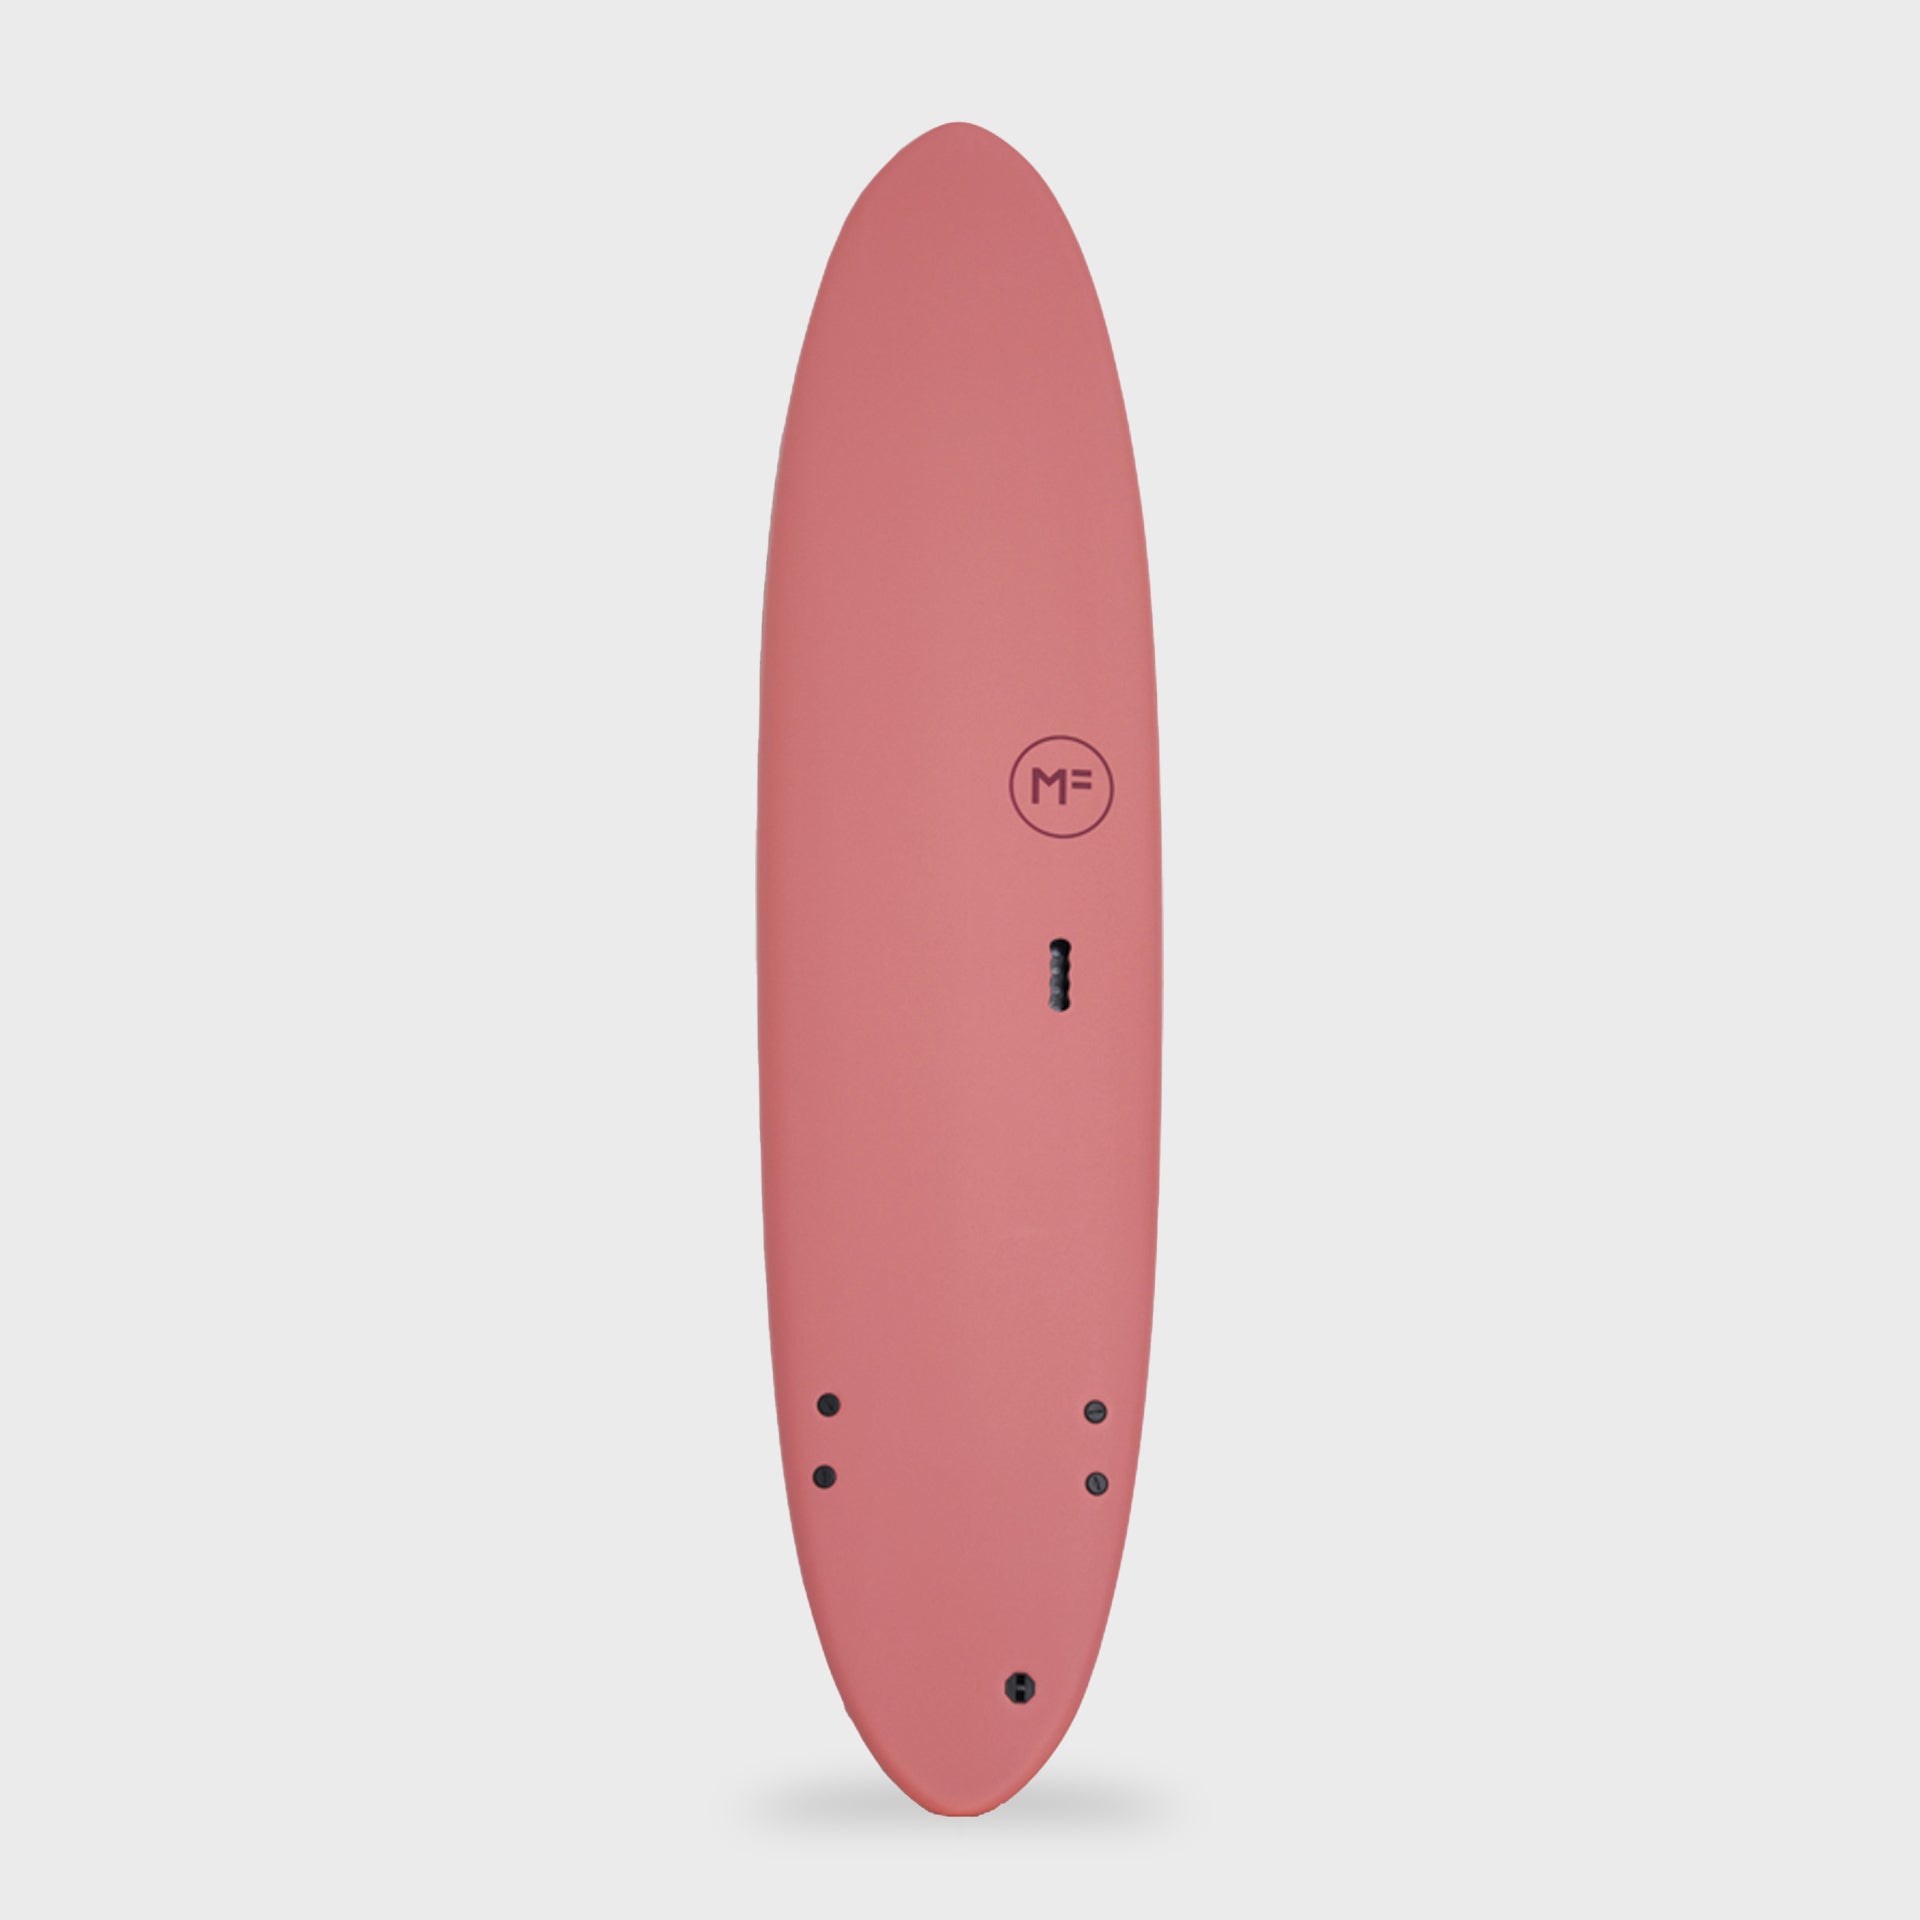 Alley Cat Super Soft - Softboard - 7&#39;0, 7&#39;6, 8&#39;0 and 8&#39;6 - Coral/Merlot - ManGo Surfing